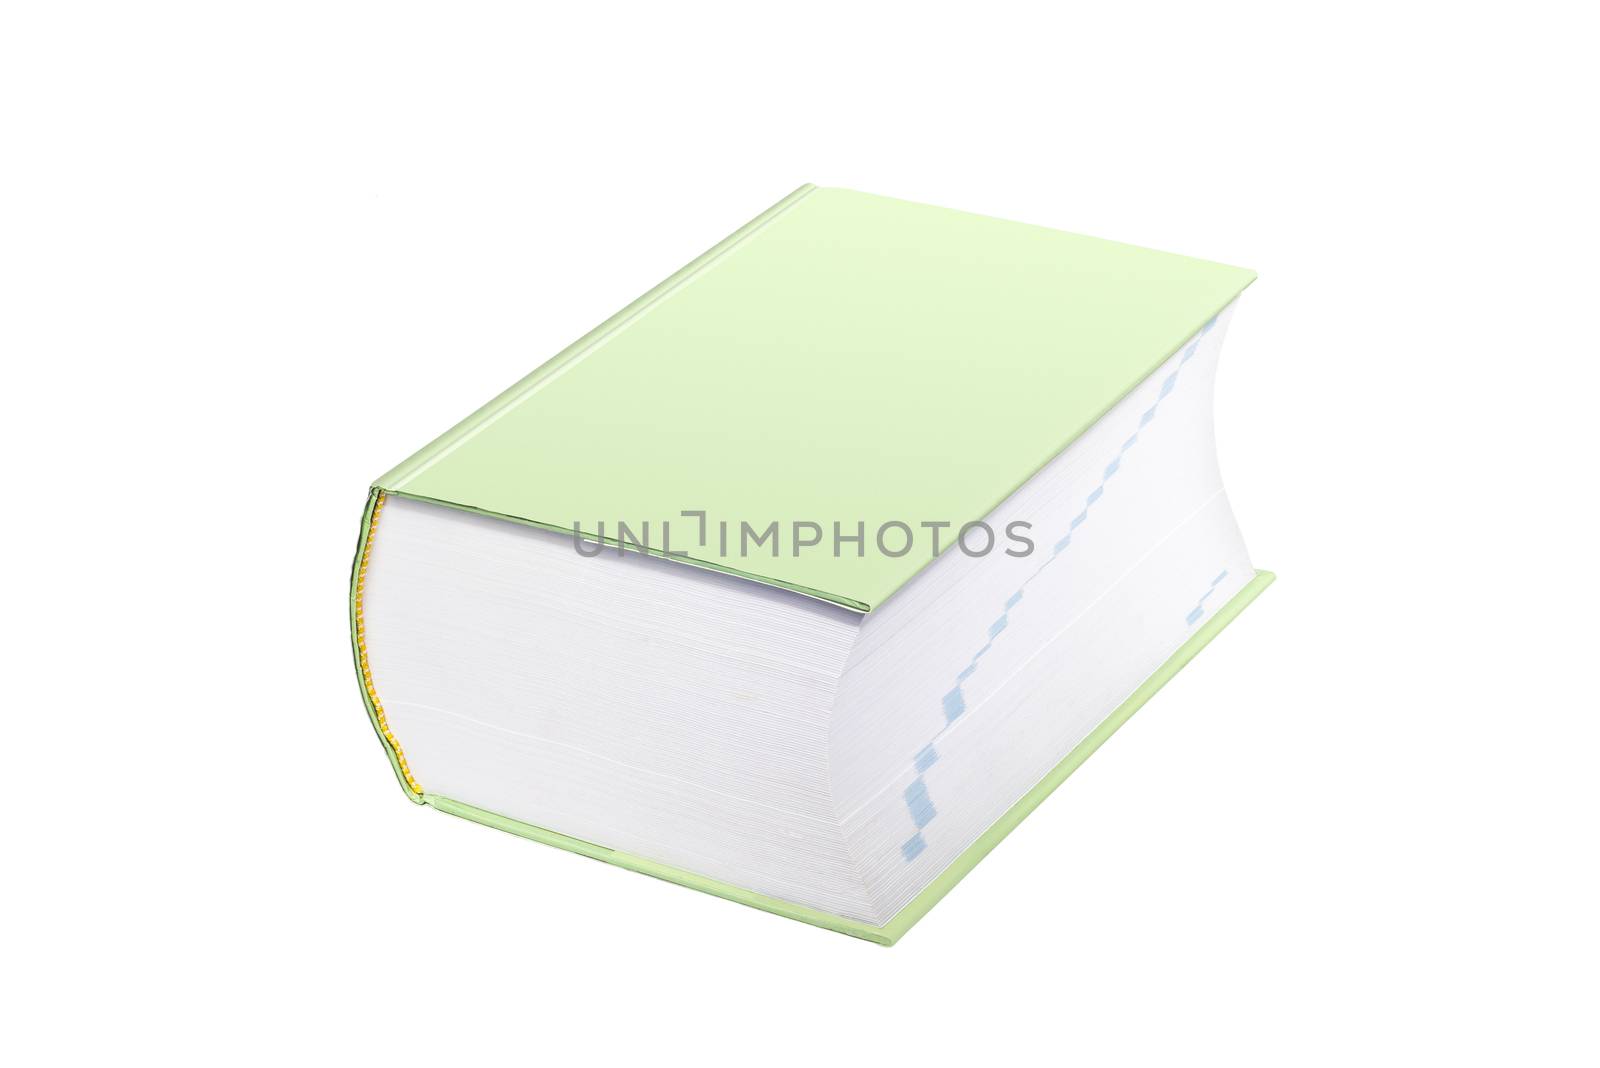 Large light green book laying on it's back on a white background.